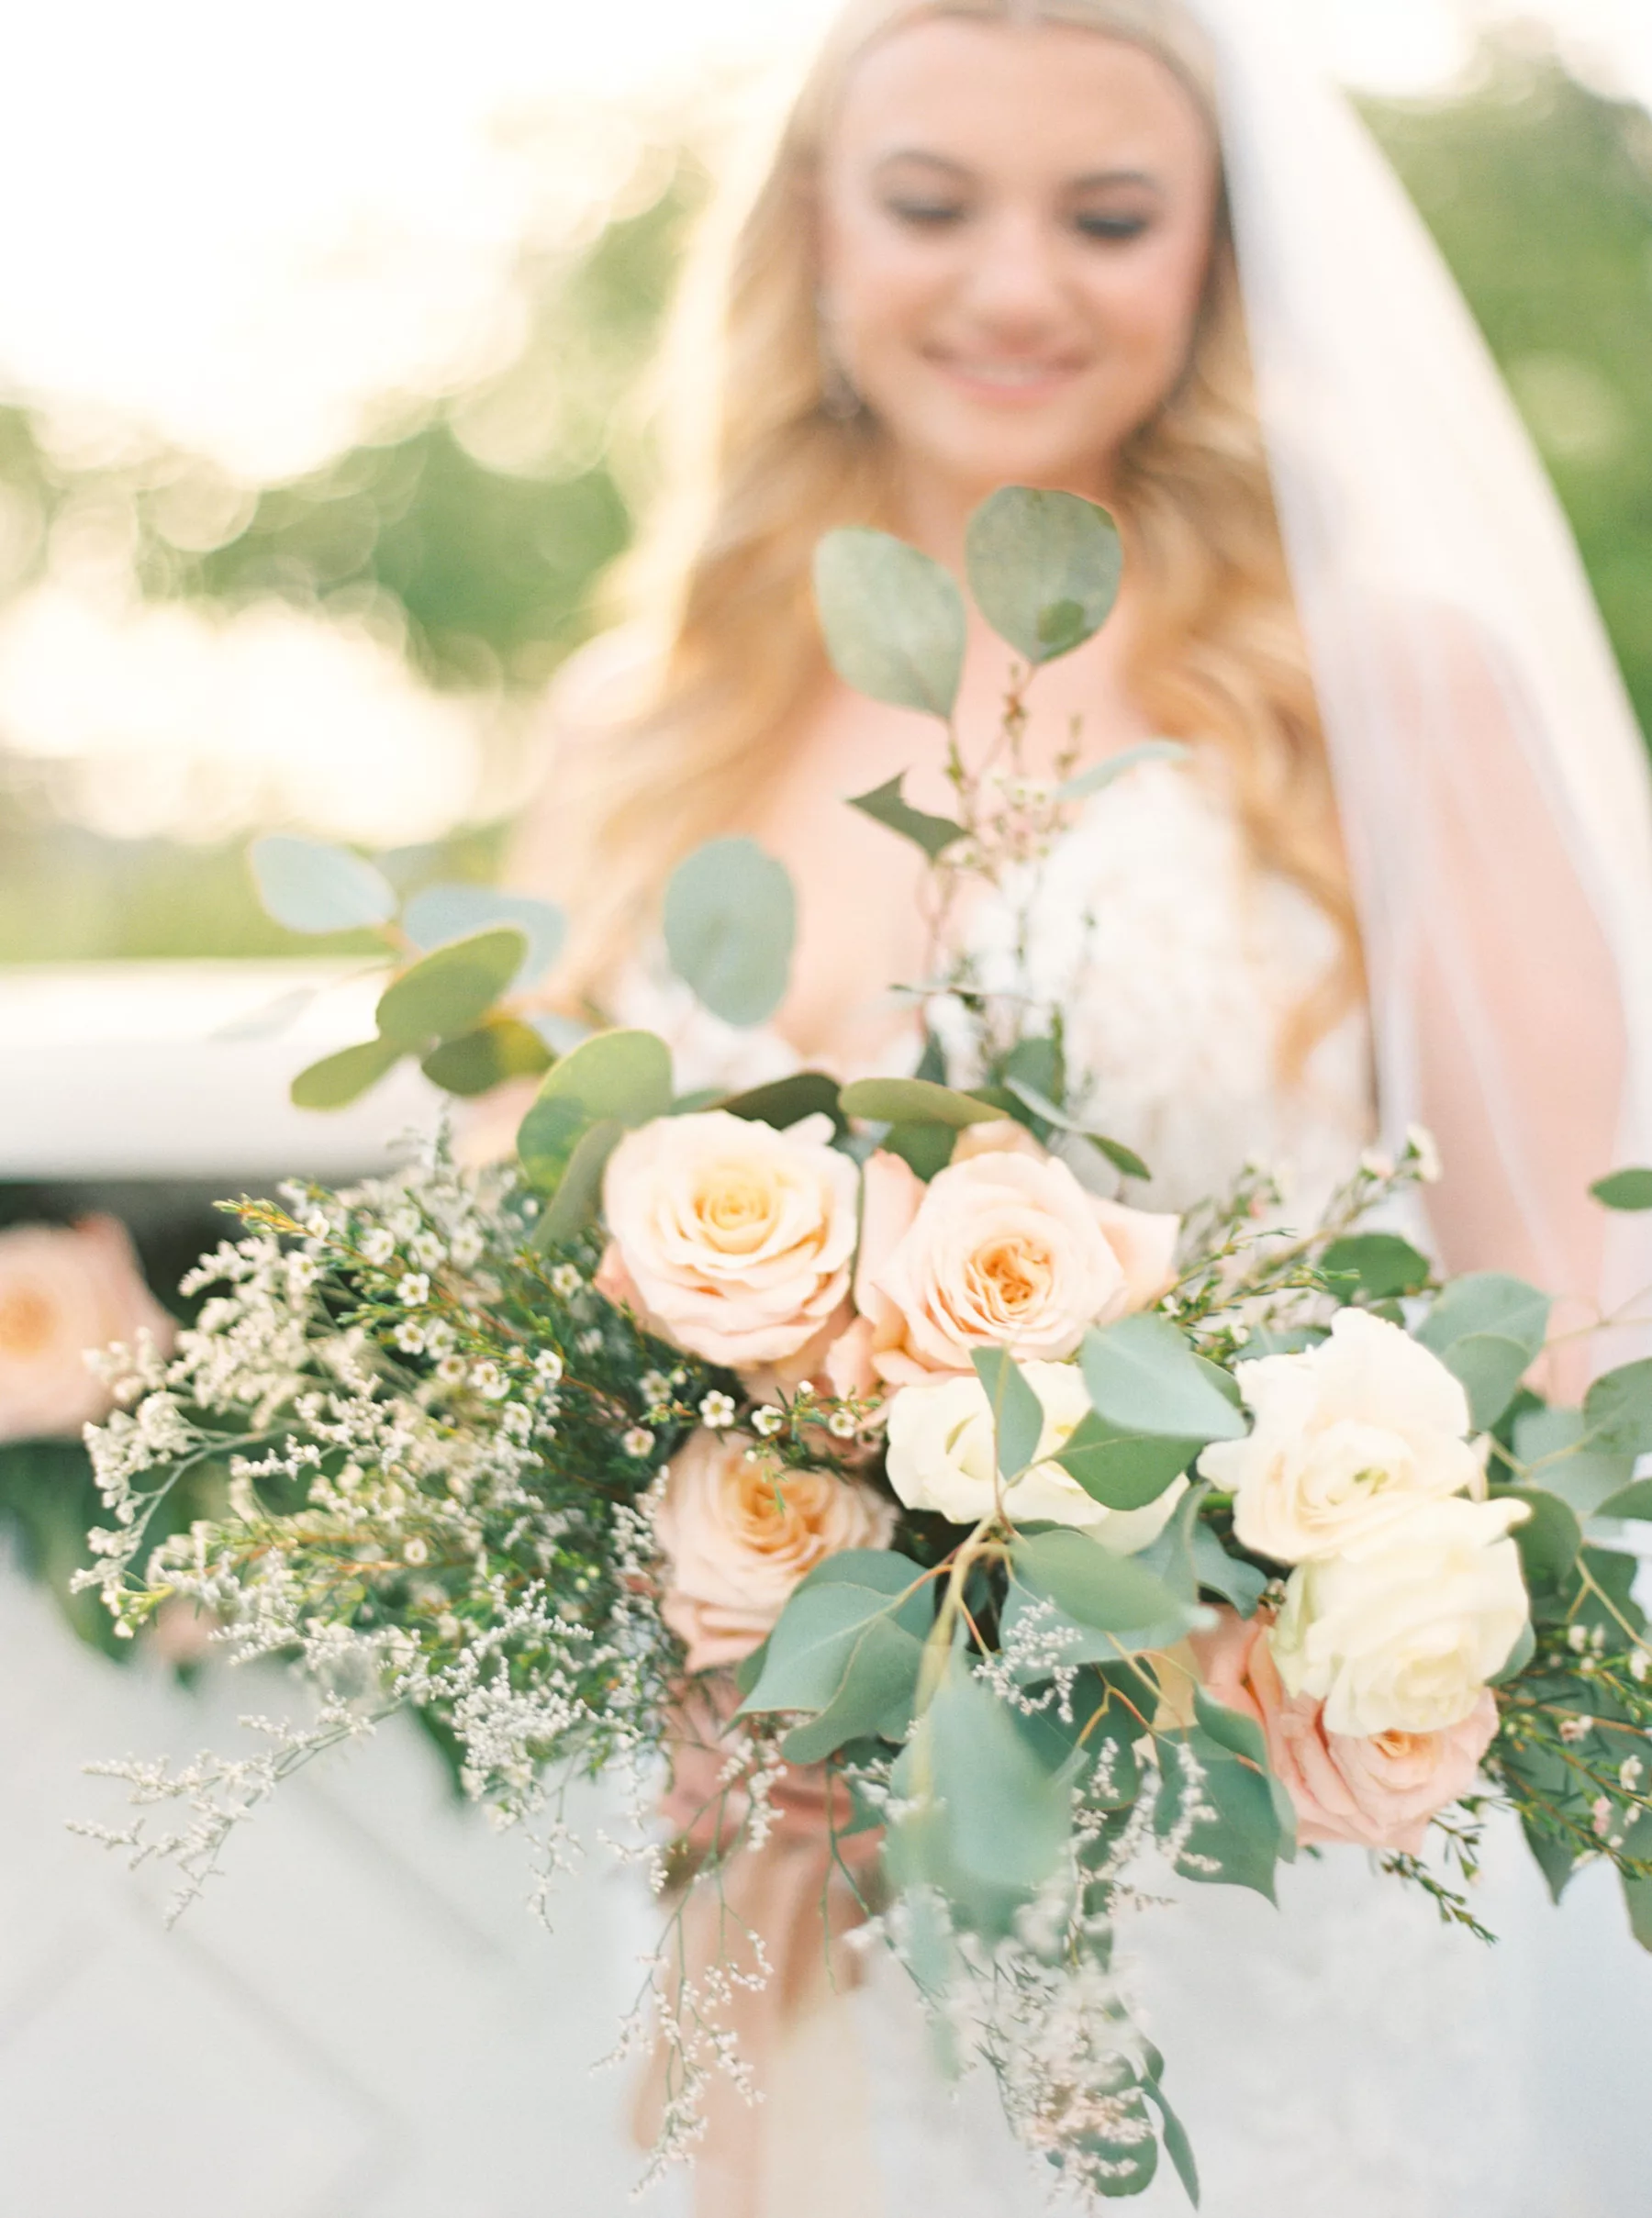 Blush Pink Roses, White Wax Flowers, and Greenery Bridal Wedding Bouquet Inspiration